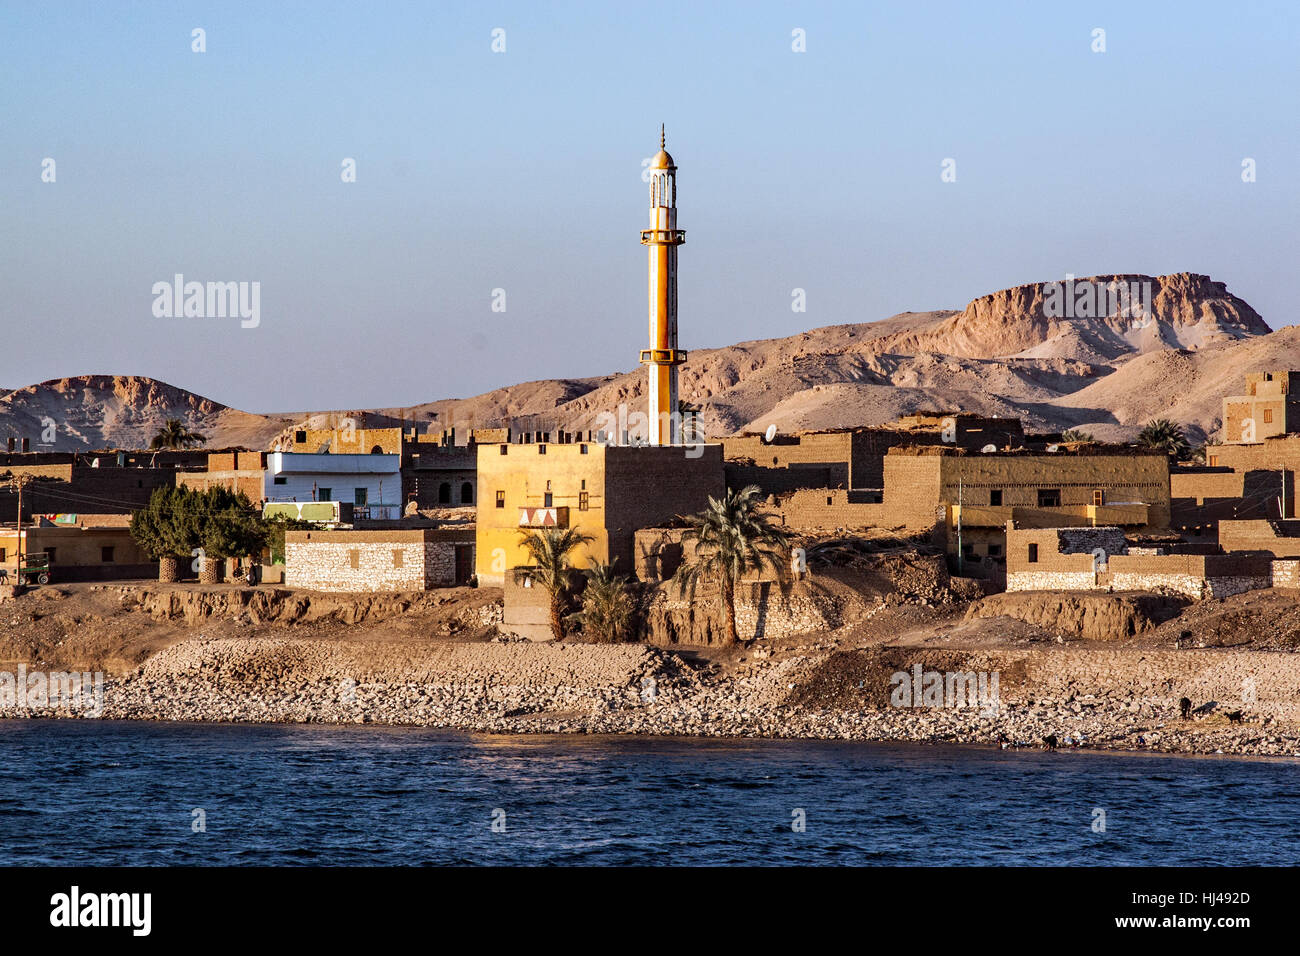 A village along the Nile River in Egypt with the minaret against the mountains at sunset Stock Photo